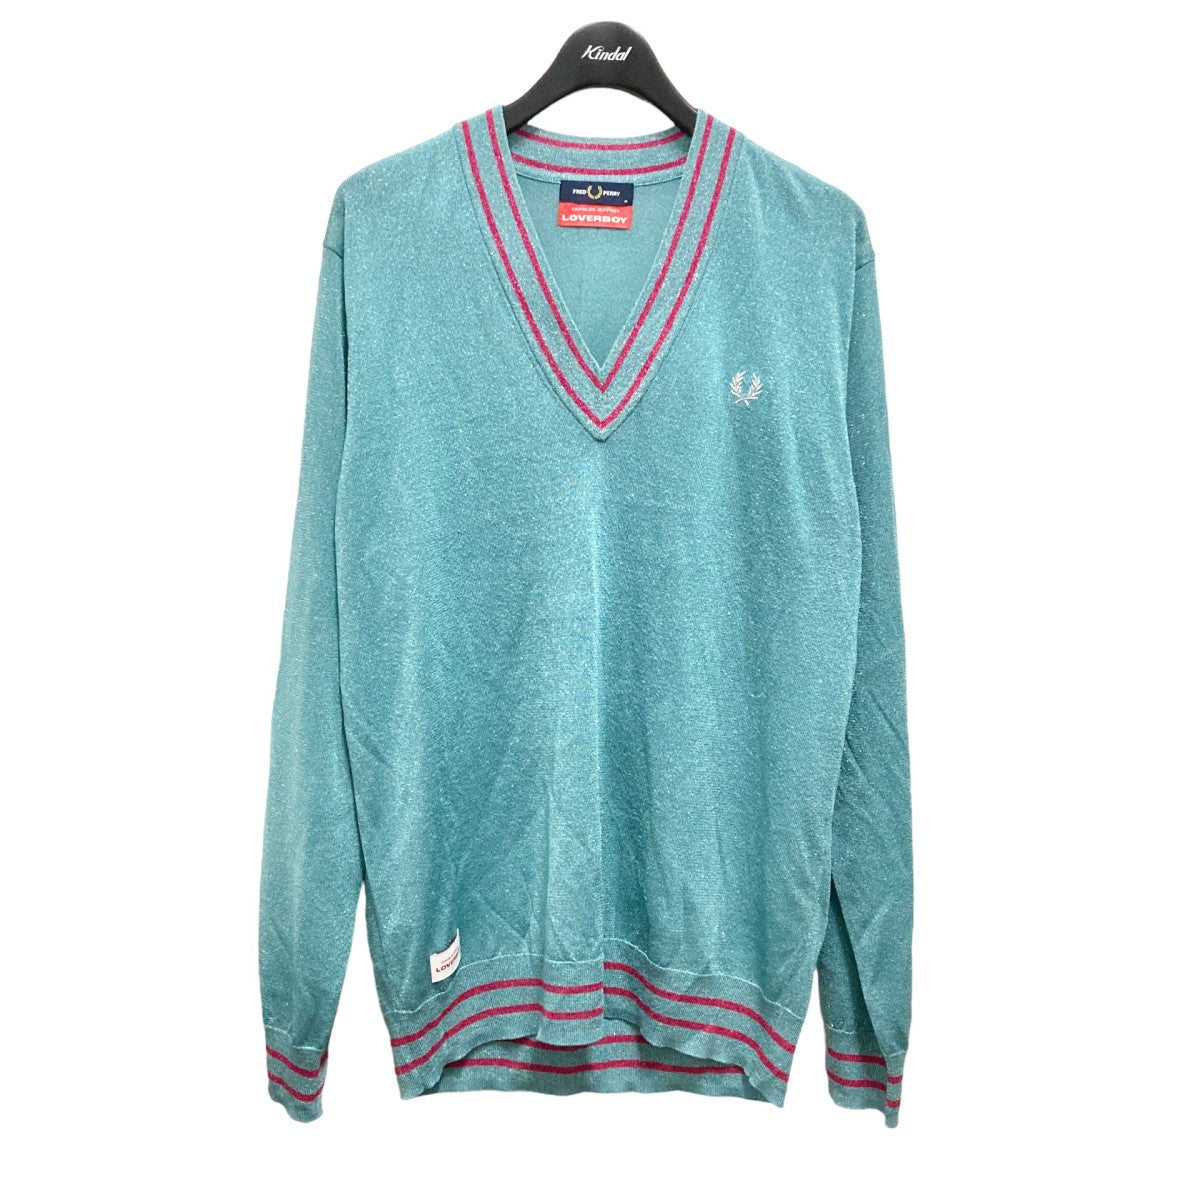 FRED PERRY×Charles Jeffrey Loverboy Glitter Knitted V Neck Jumper 